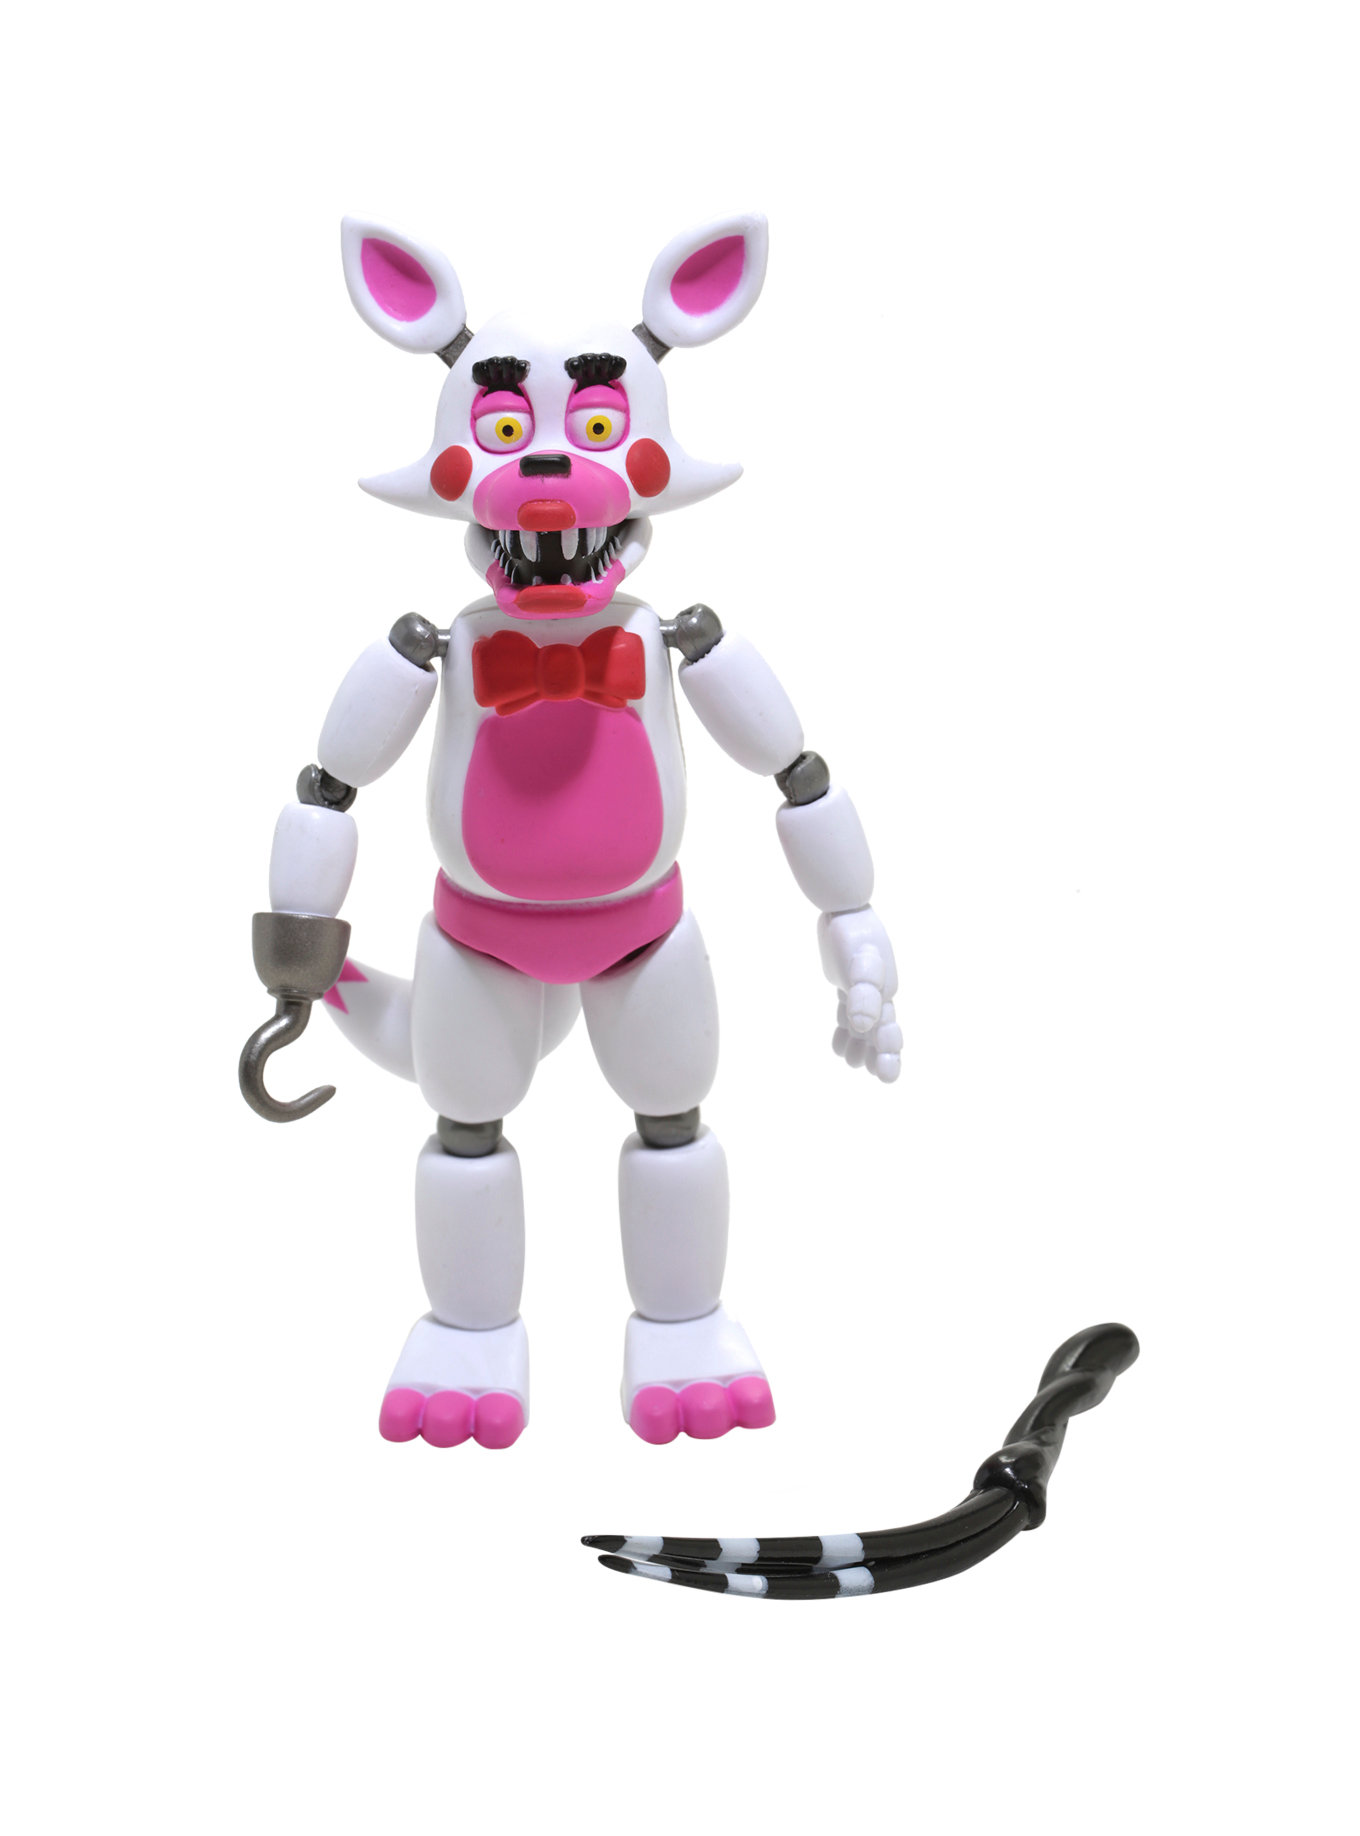 Funko 5 Articulated Action Figure: Five Nights at Freddy's